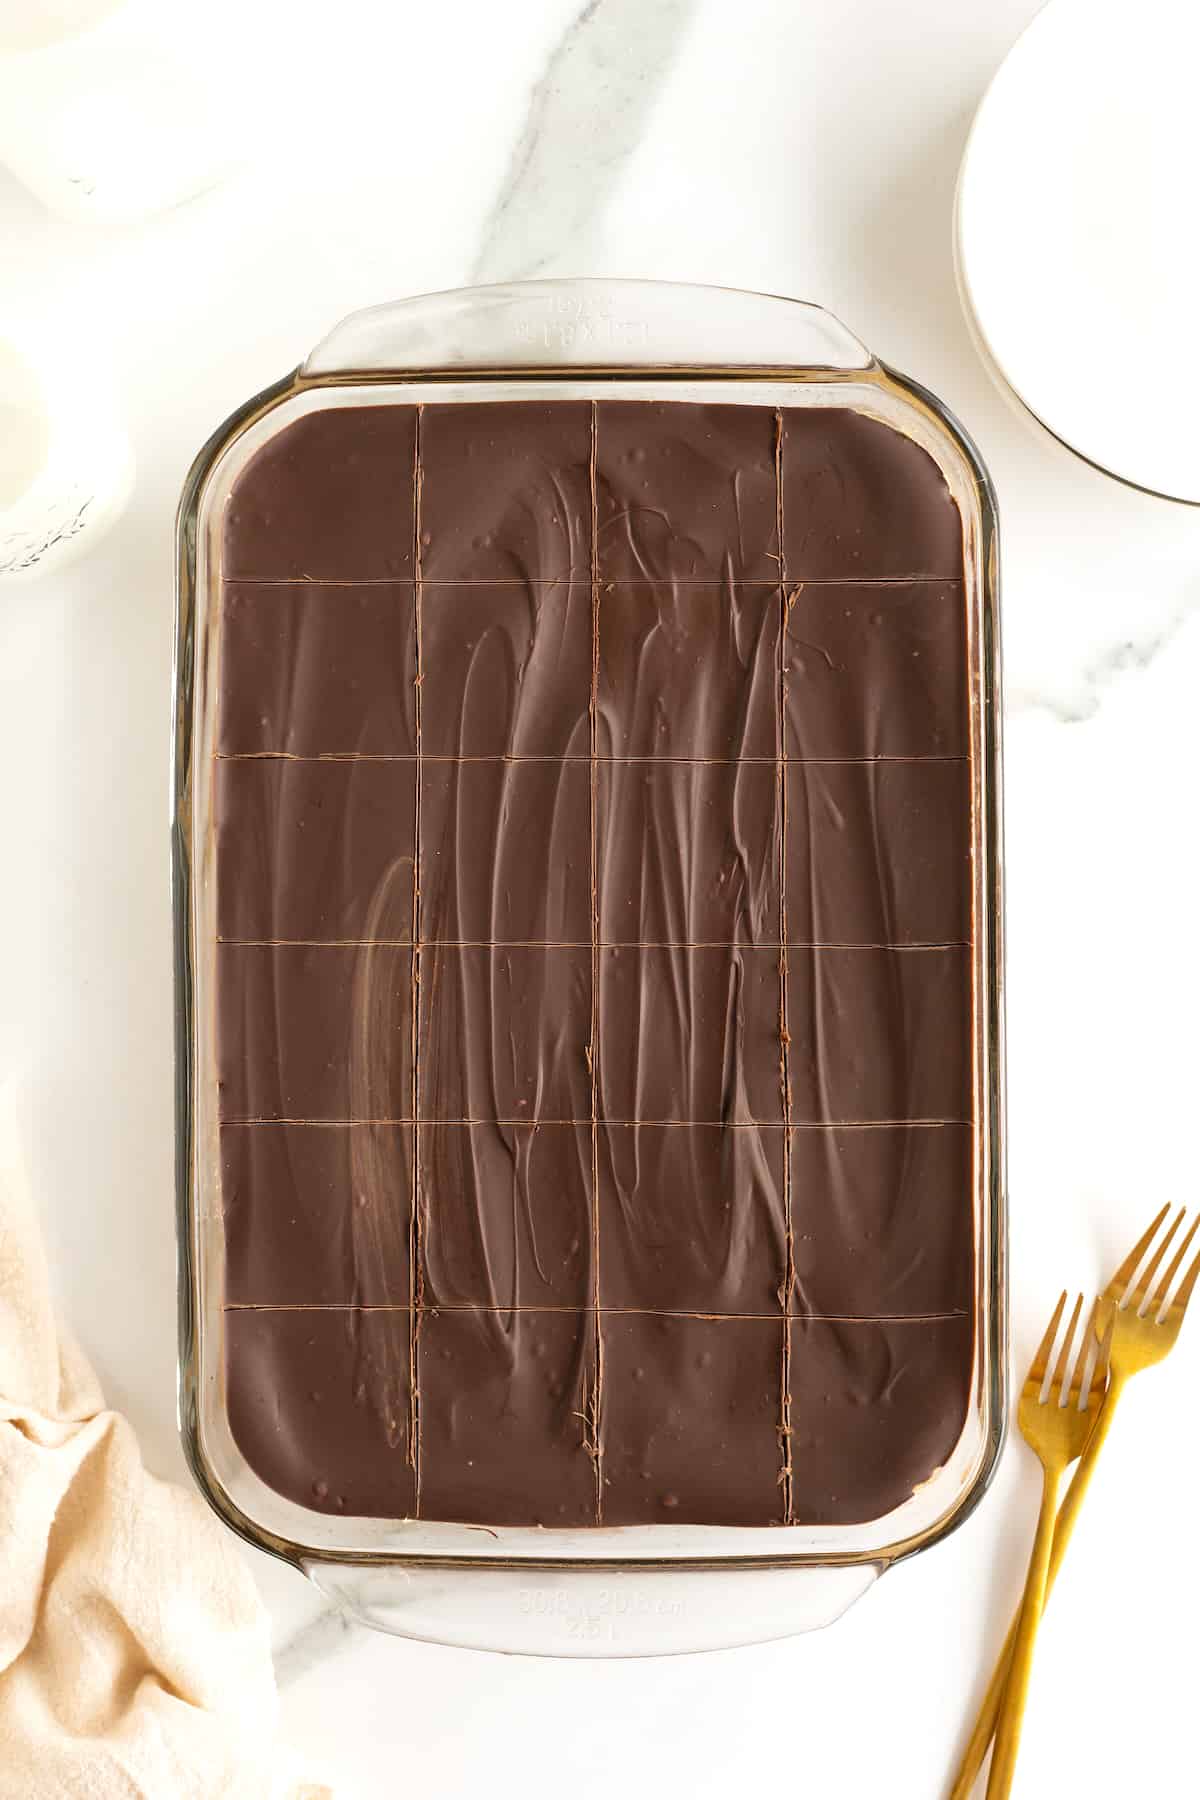 A glass baking dish with chocolate covered peanut butter bars cut into even squares.